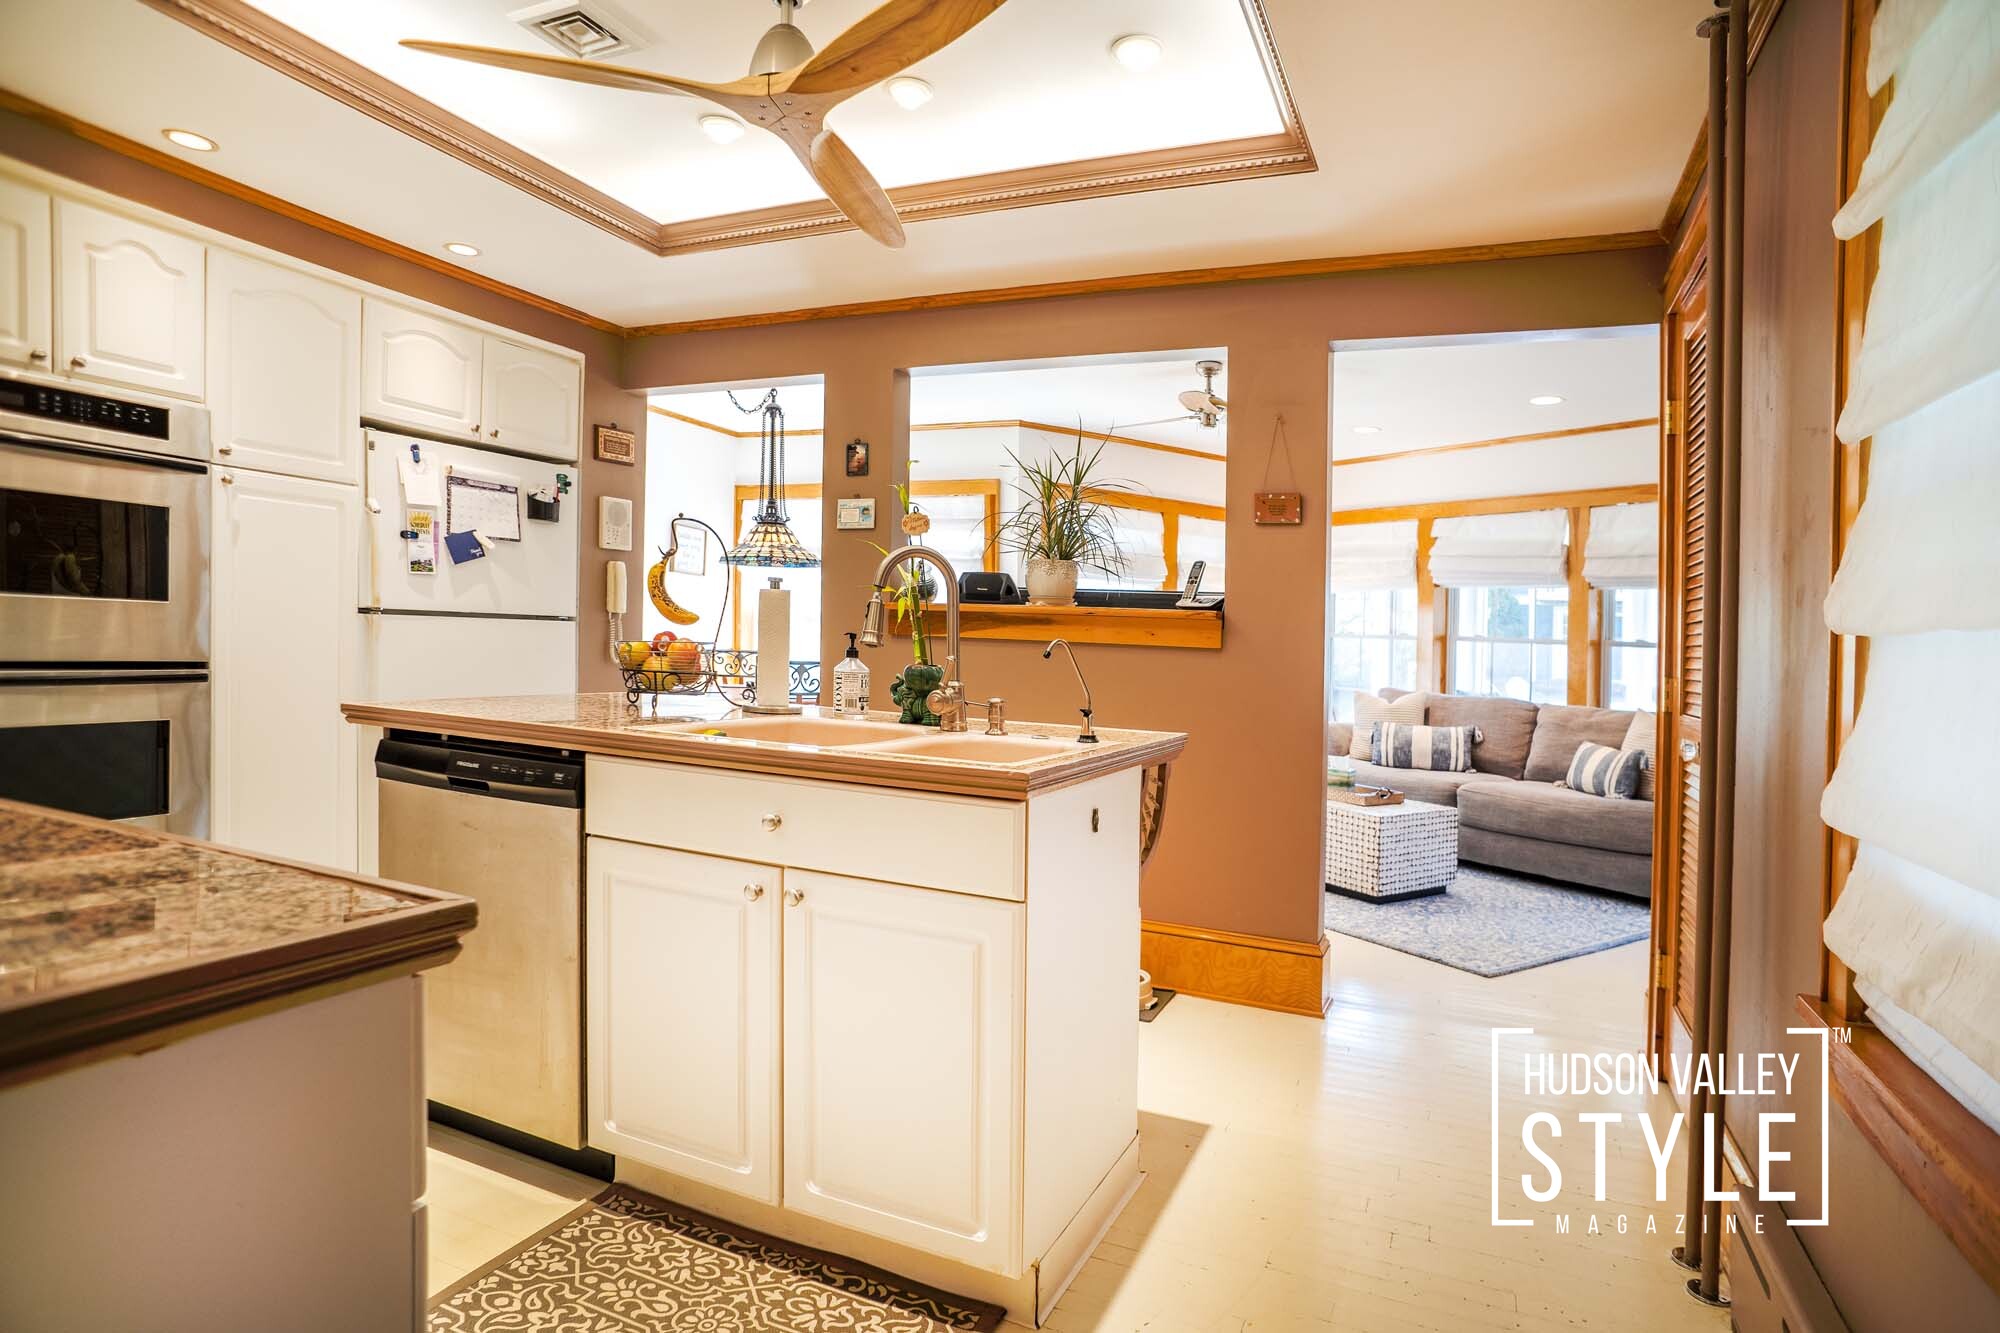 Beautiful and Cozy Hudson Valley Home for Sale just a Block away from the Hudson River and Chelsea, NY Yacht Club – Real Estate Photography by Duncan Avenue Studios